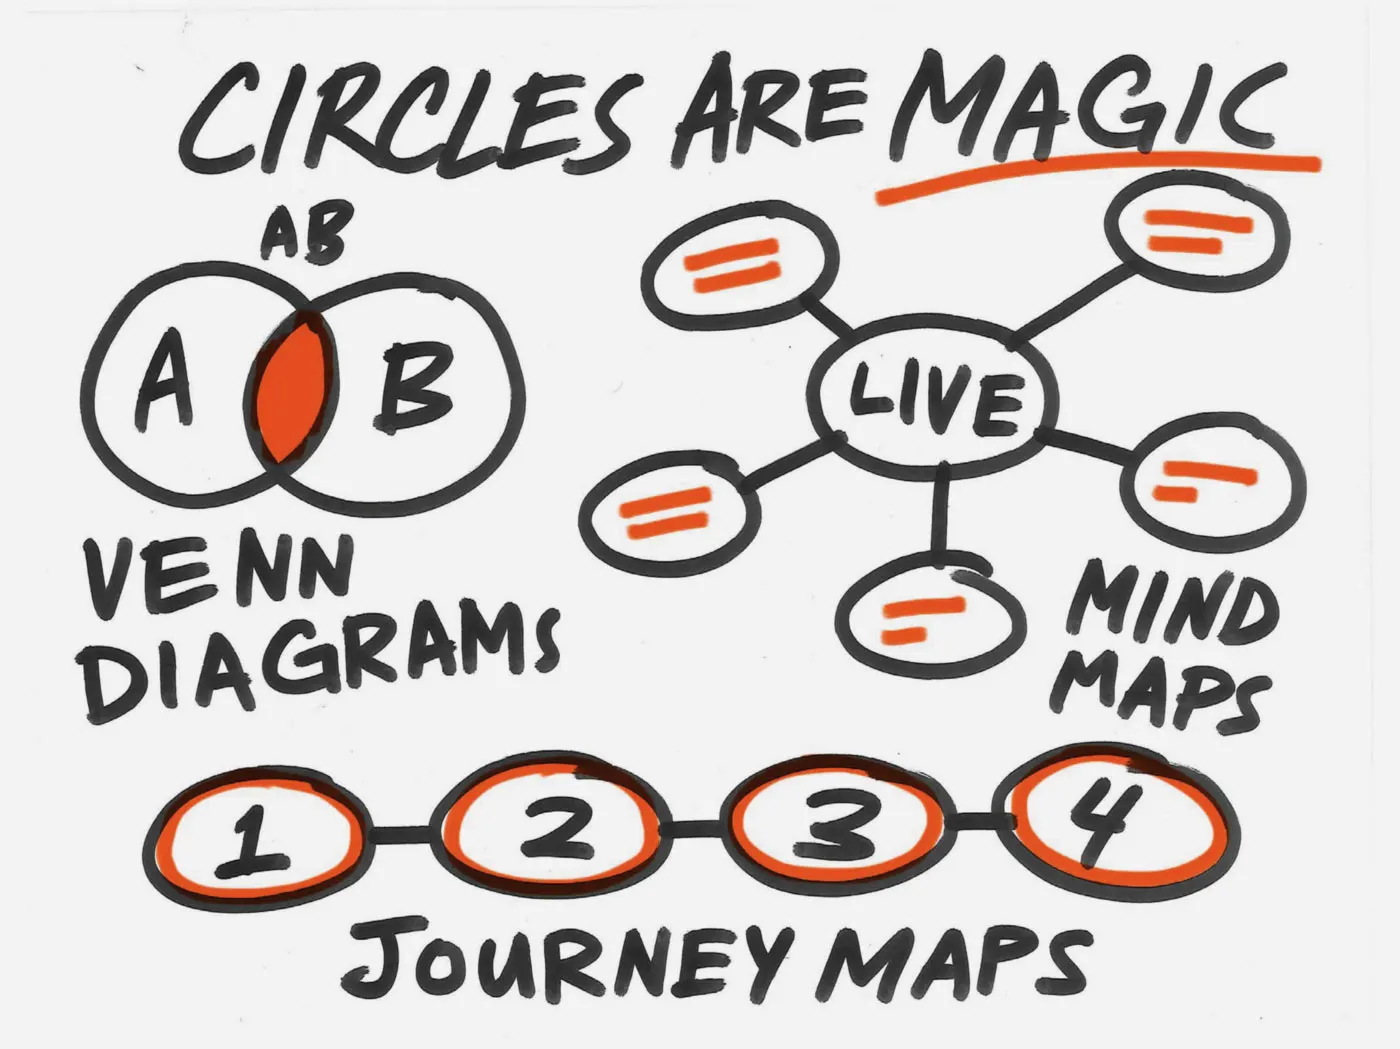 Black marker sketch with the heading "Circles Are Magic" with drawing/word pairings of Venn diagrams, mind maps, and journey maps.